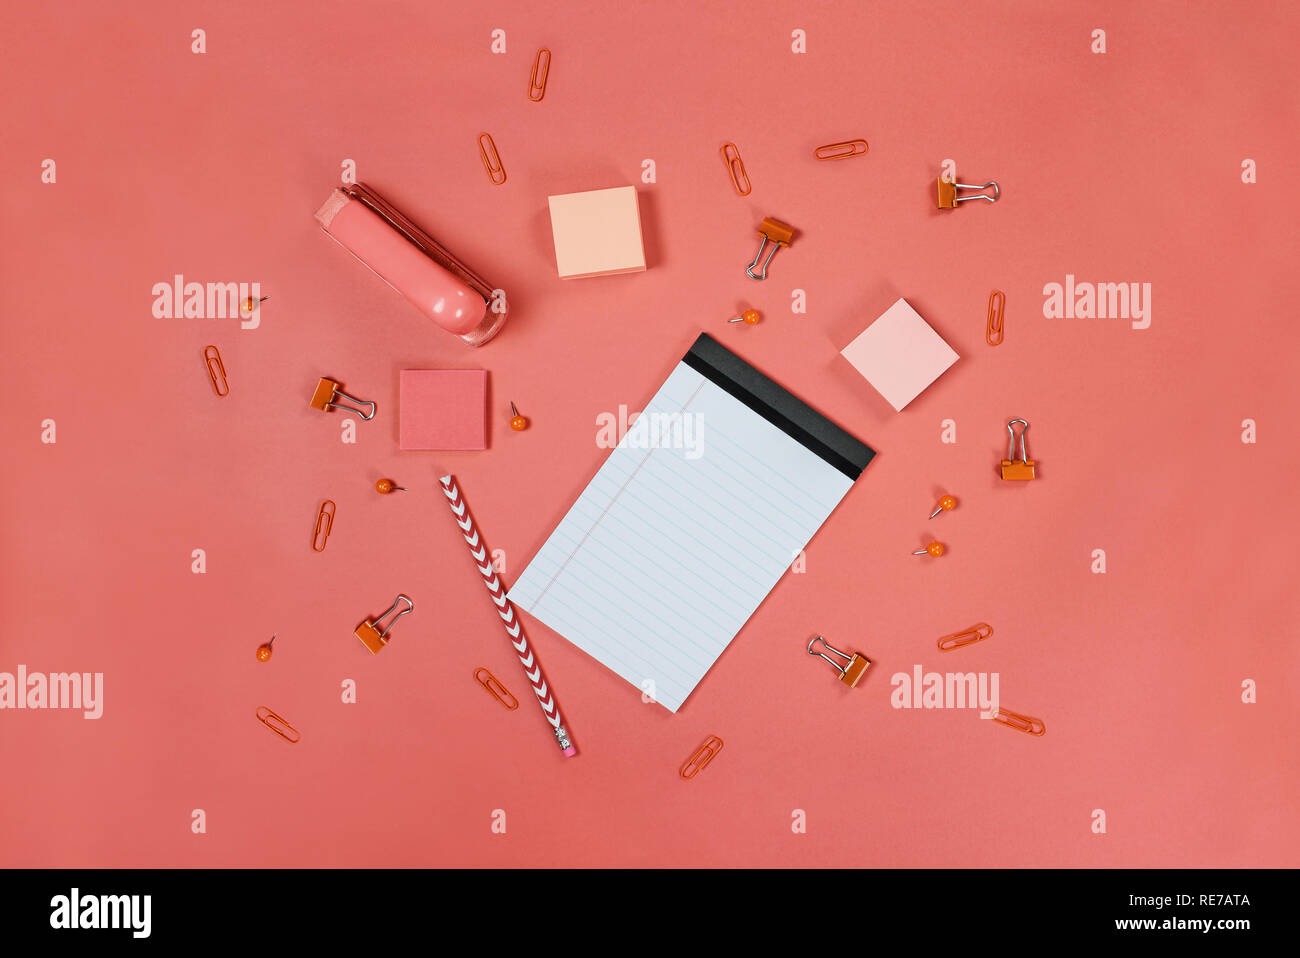 Blank White Note Pad Paper Pencil Stapler Thumb Tacks Paper Clips And Adhesive Paper Over Coral Color Background With Free Space For Text Image Stock Photo Alamy